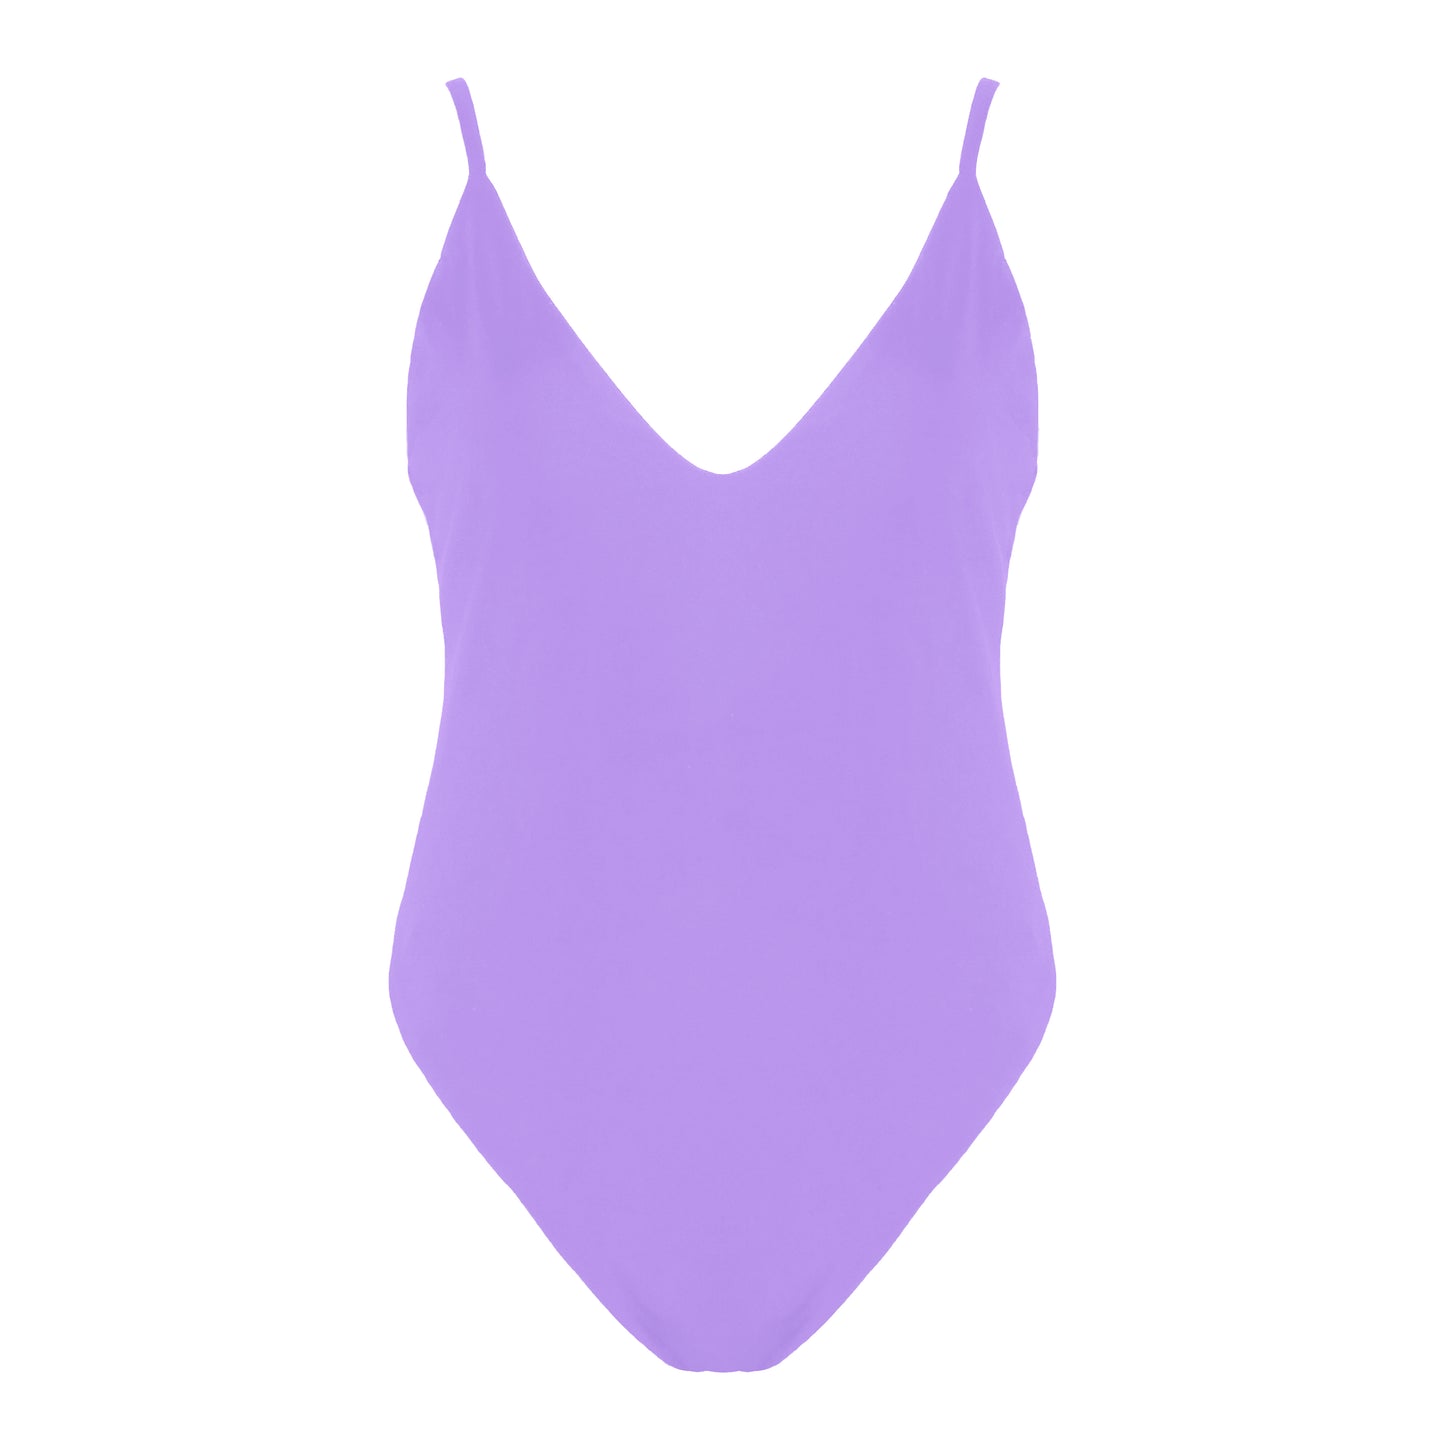 Lavender simplistic plunging v-neck one piece swimsuit with a low v-back, high cut legs and full coverage.